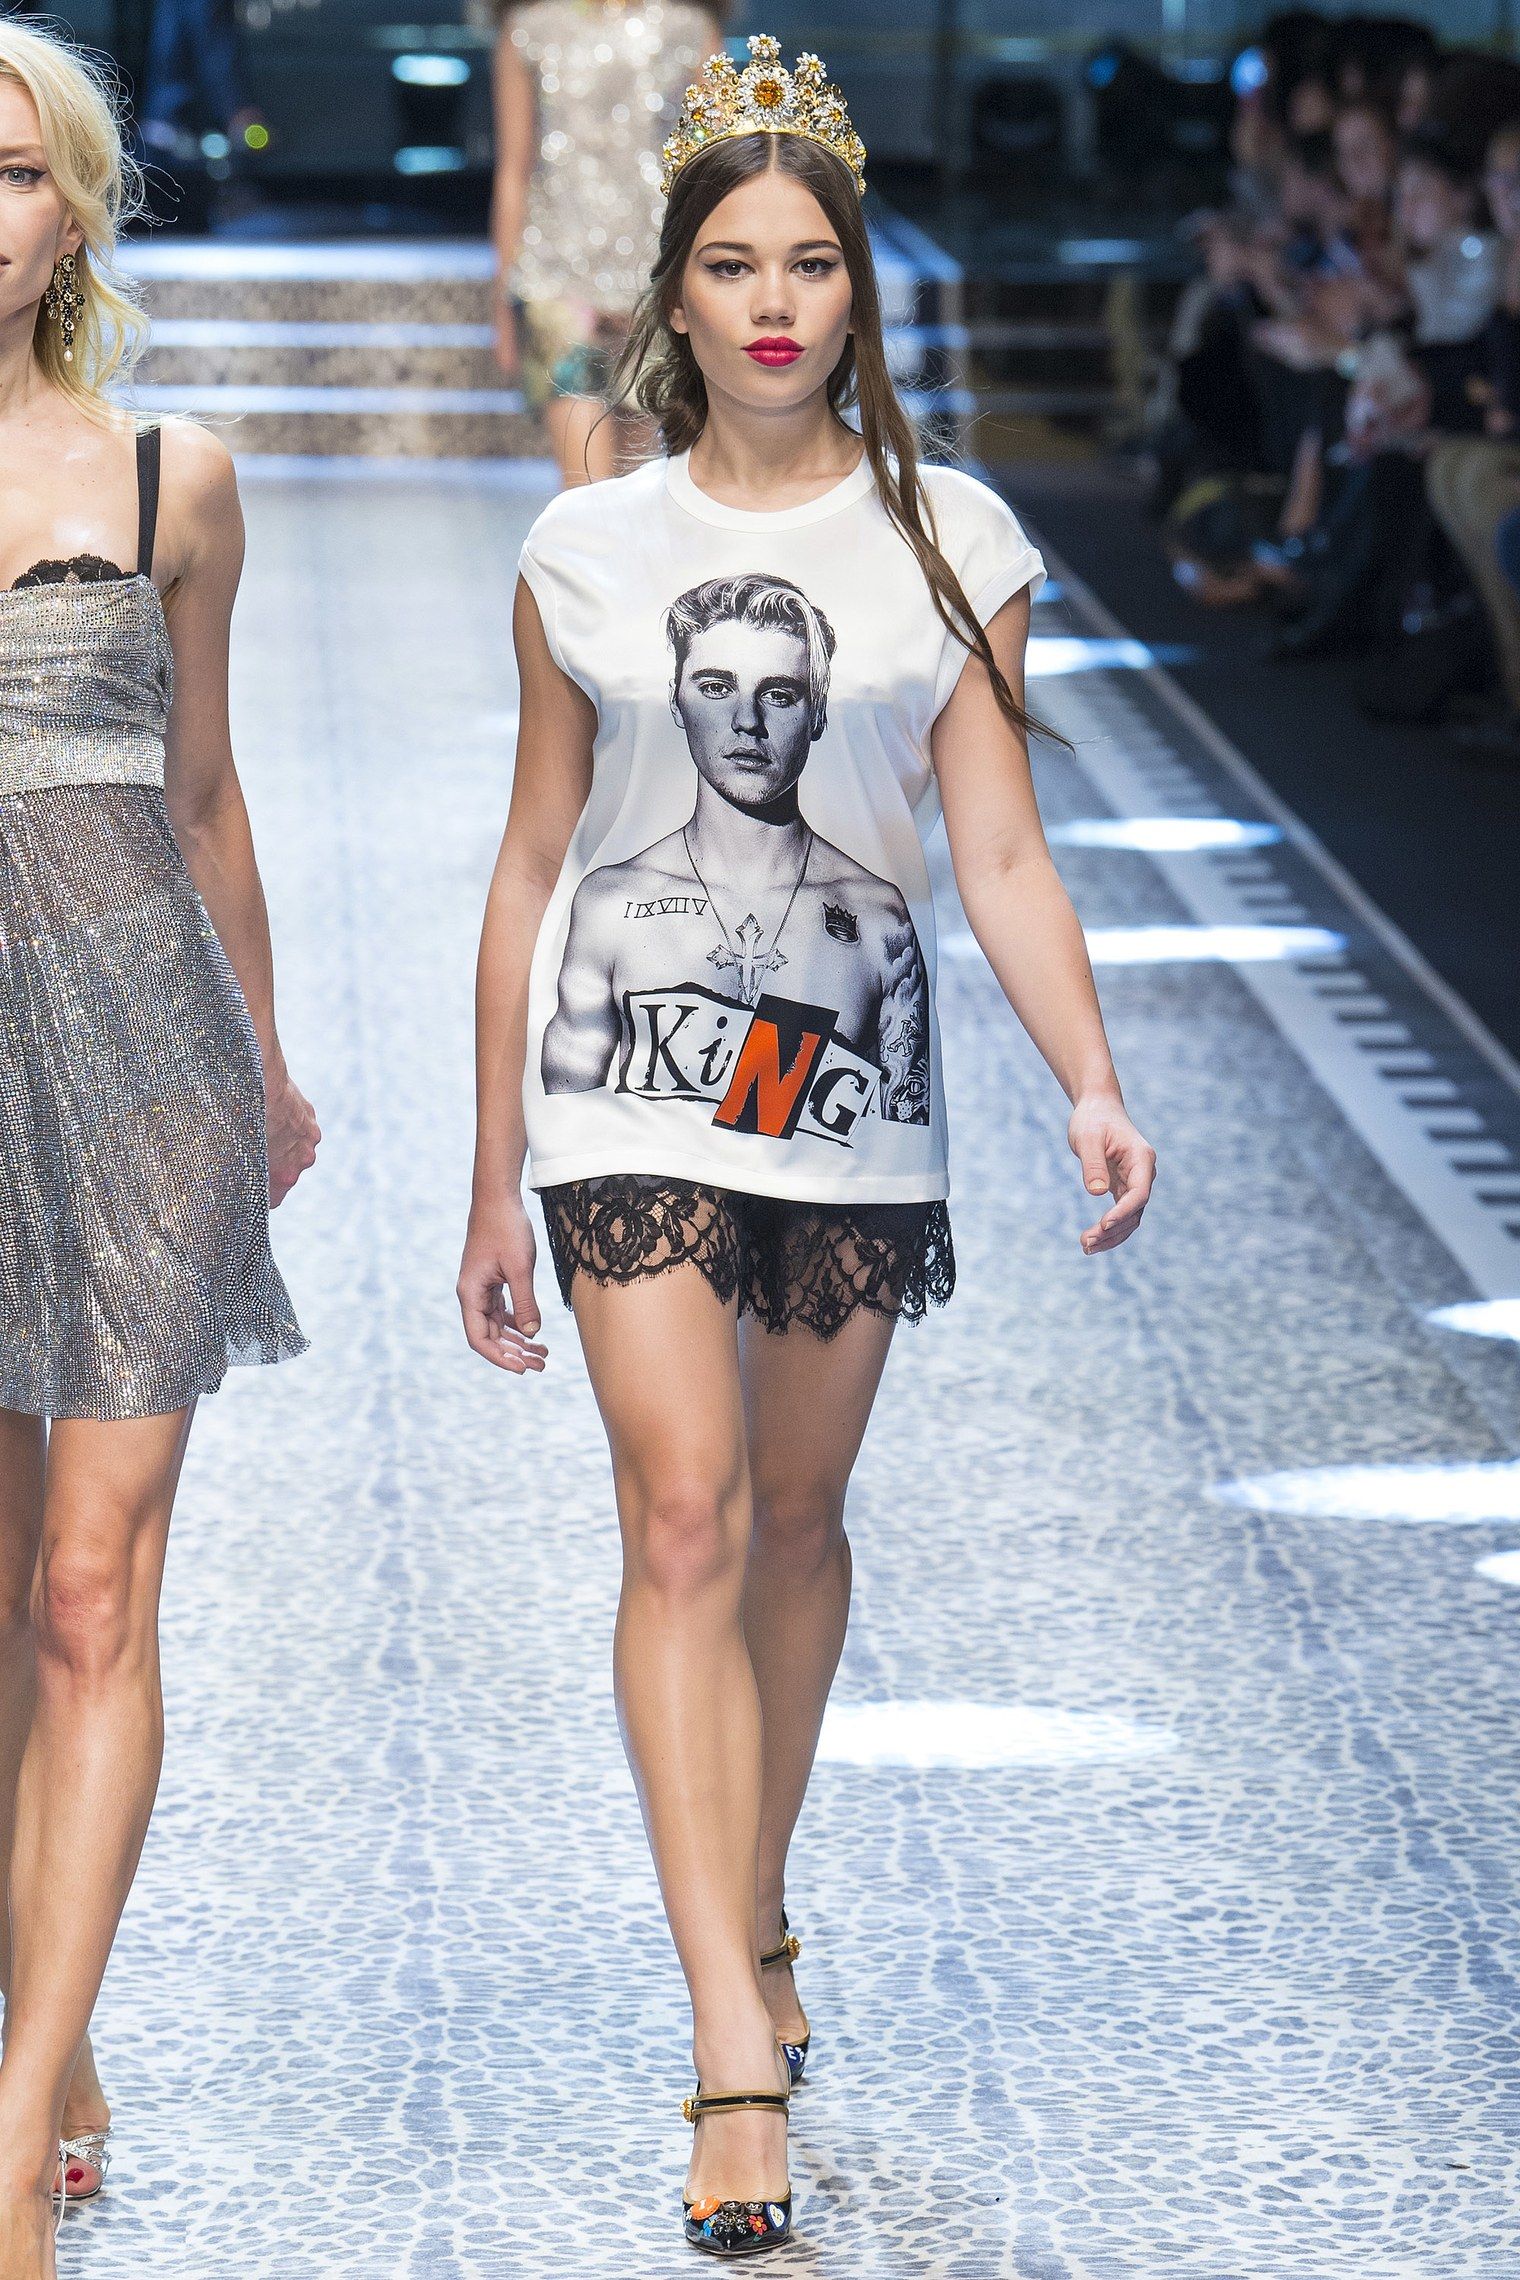 Dolce & Gabbana Make Tribute T-shirts for Justin Bieber, Exaggerated or Cool?